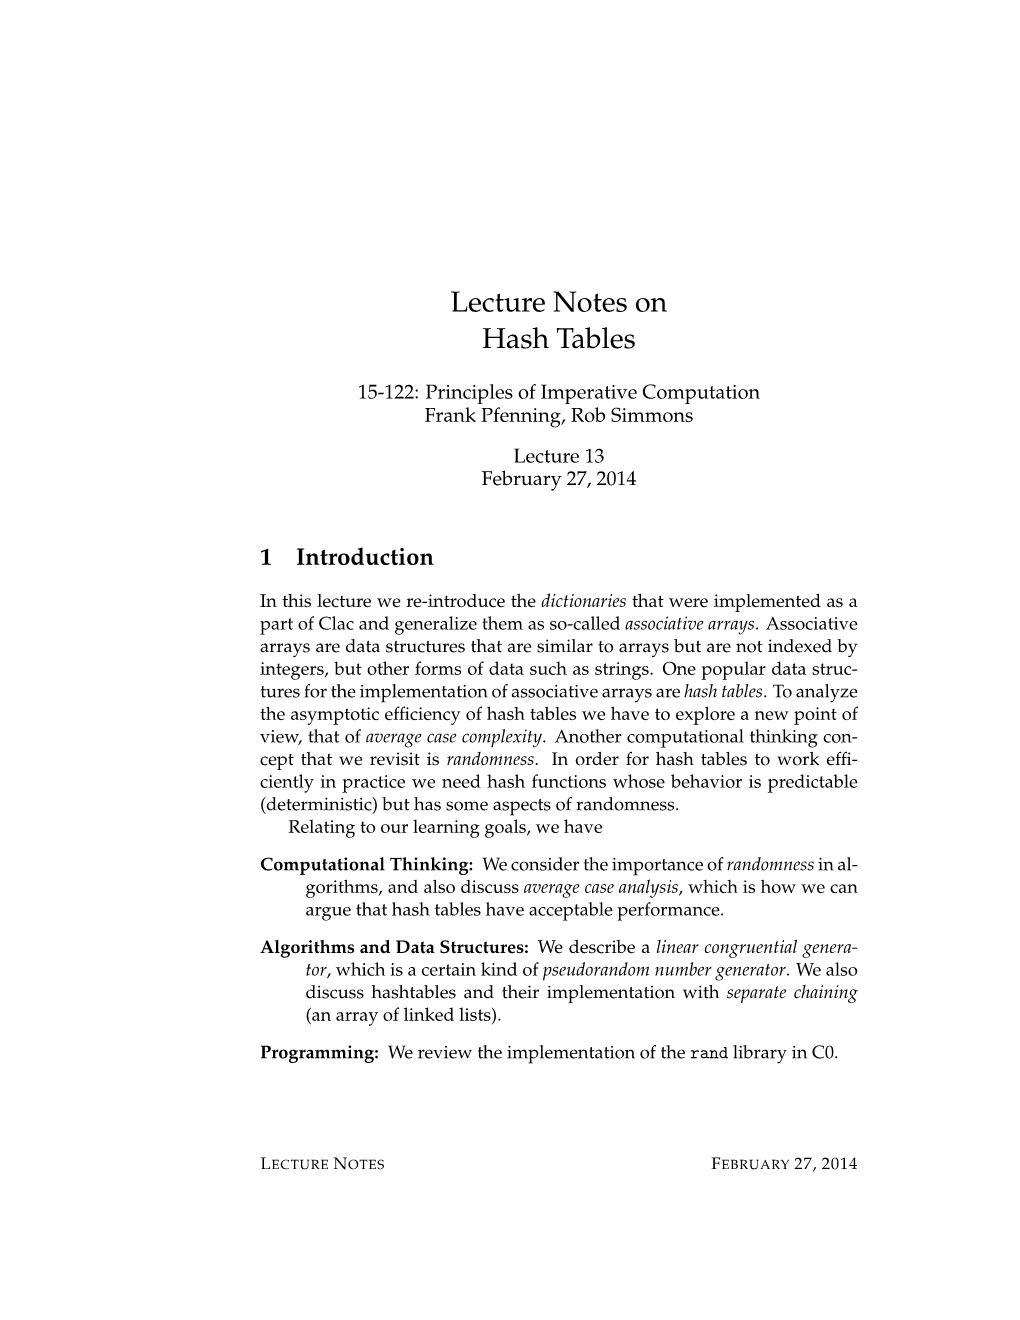 Lecture Notes on Hash Tables